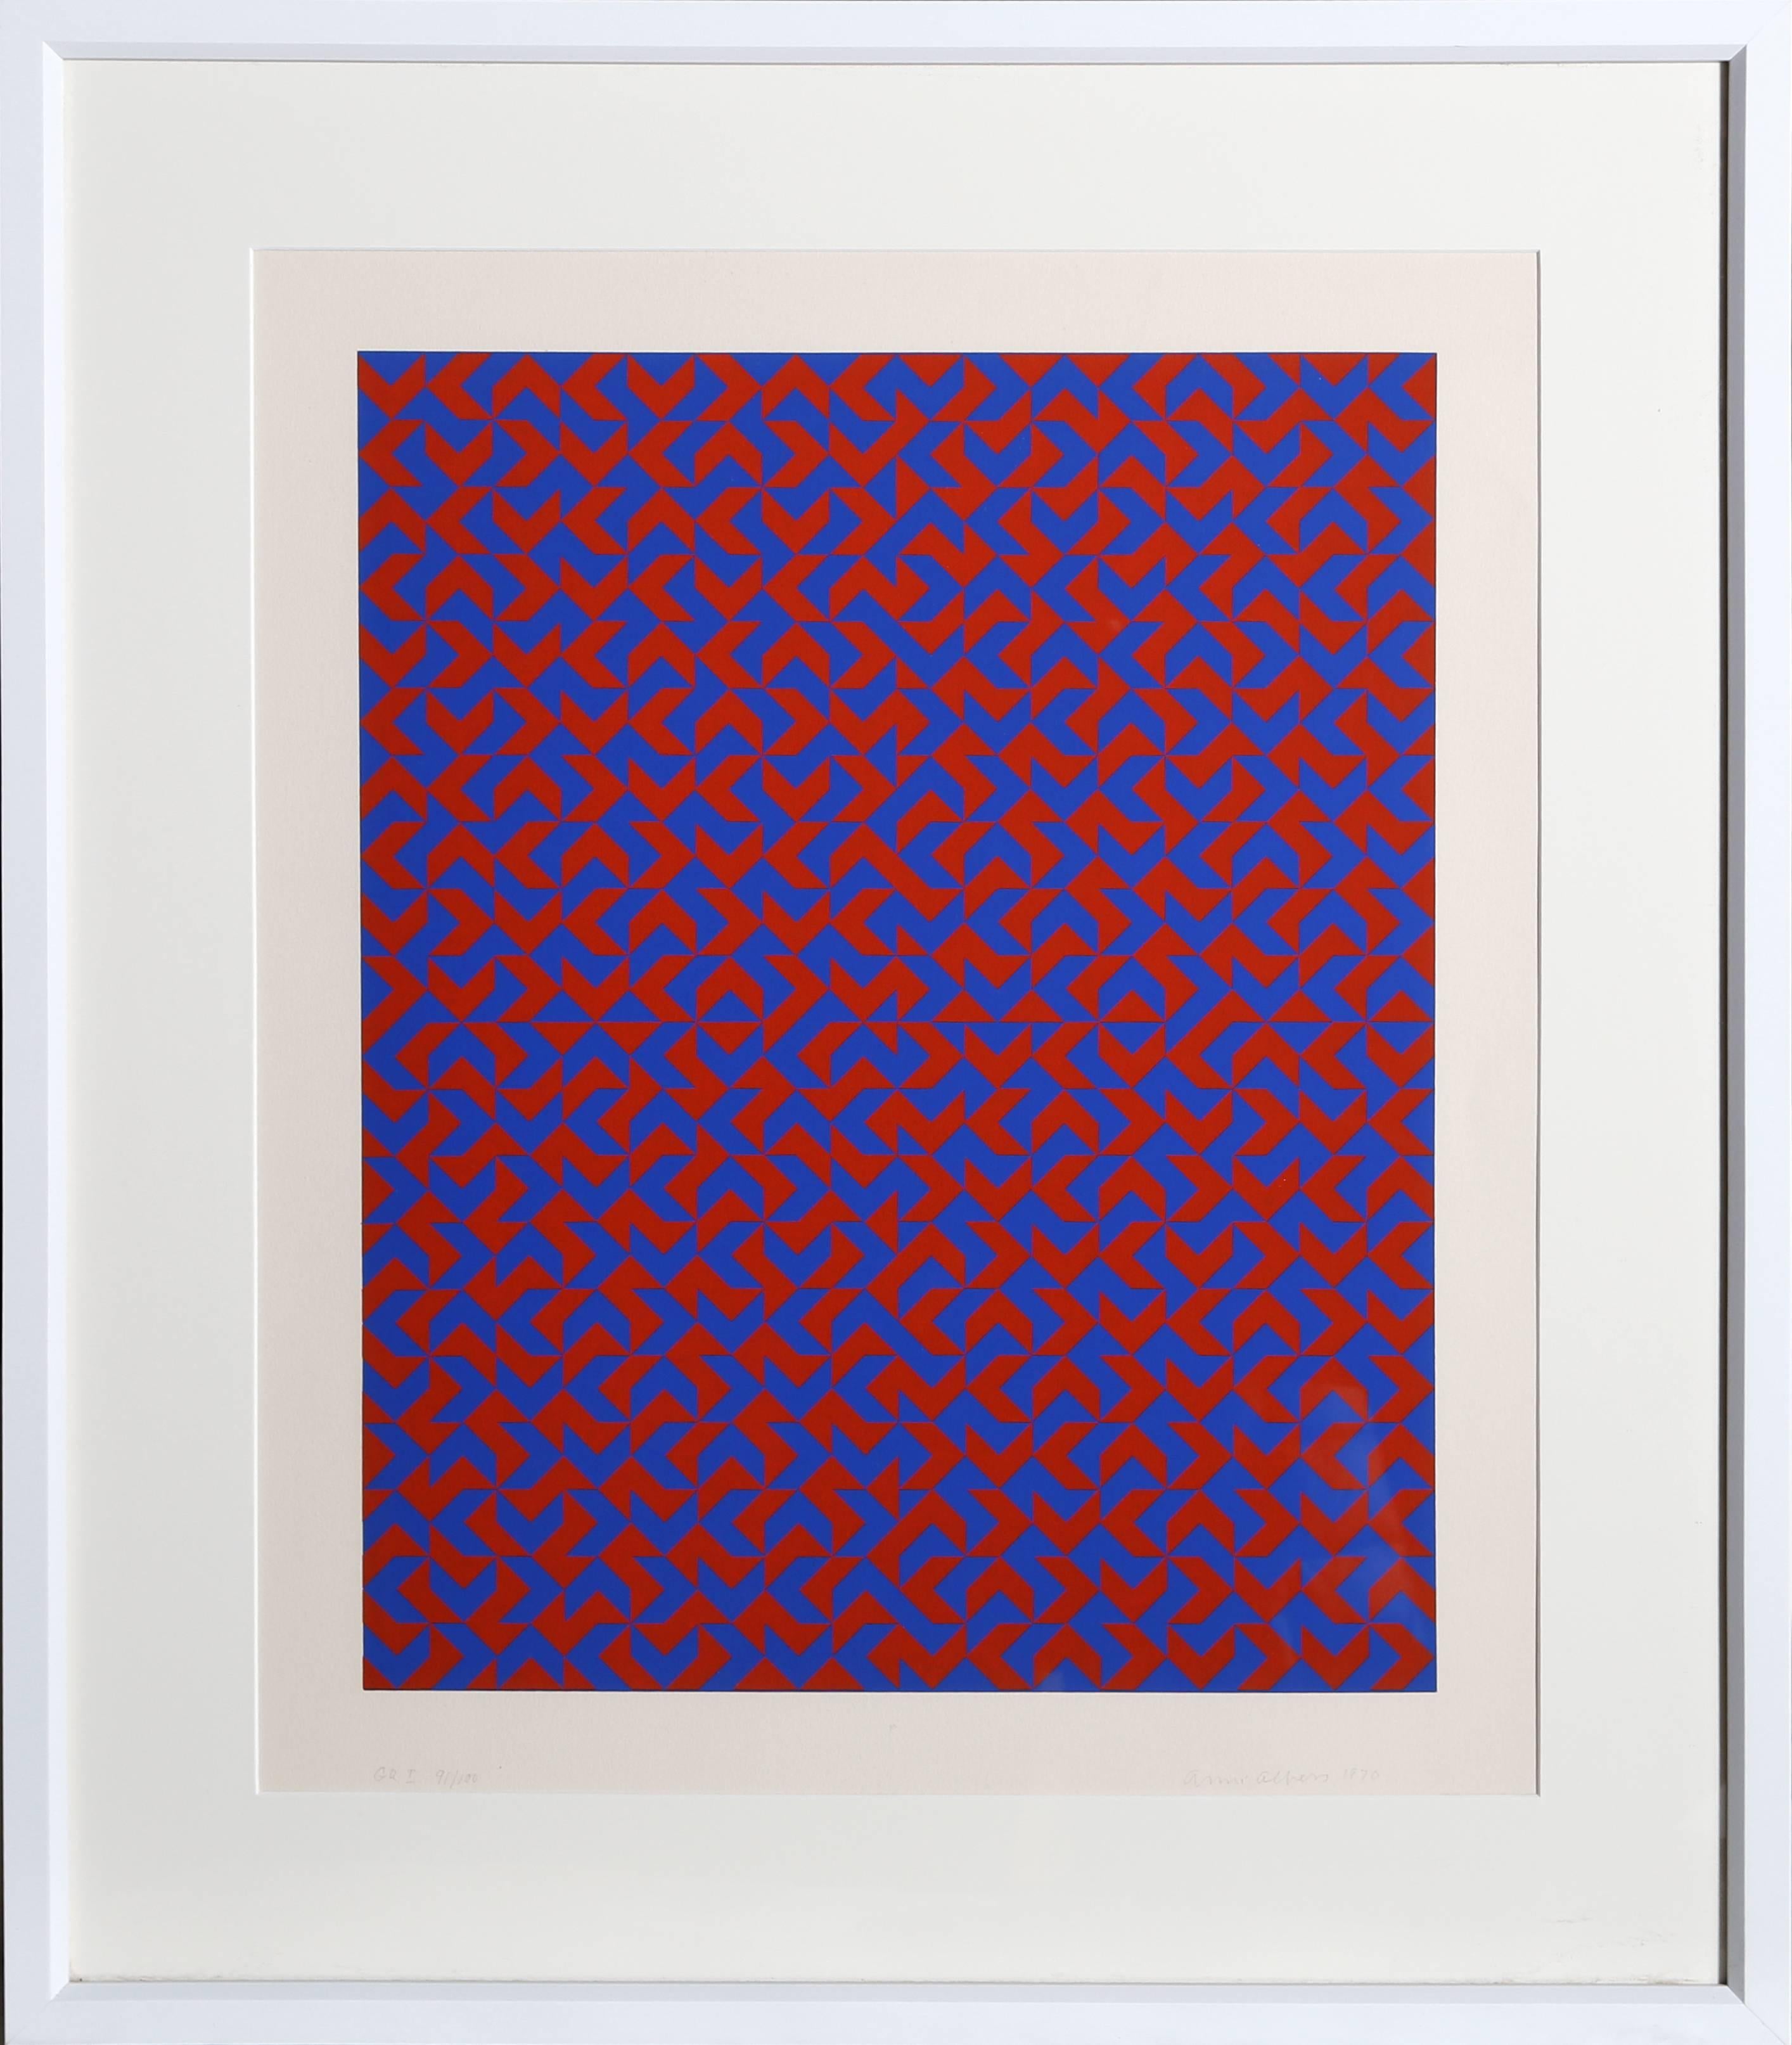 Artist: Anni Albers, German/American (1899 - 1994)
Title: GR I
Year: 1970
Medium: Silkscreen on Arches Paper, signed and numbered in pencil
Edition: 100
Image Size: 20 x 16 inches
Size: 29 x 24 in. (73.66 x 60.96 cm)
Frame: 32 x 28 inches